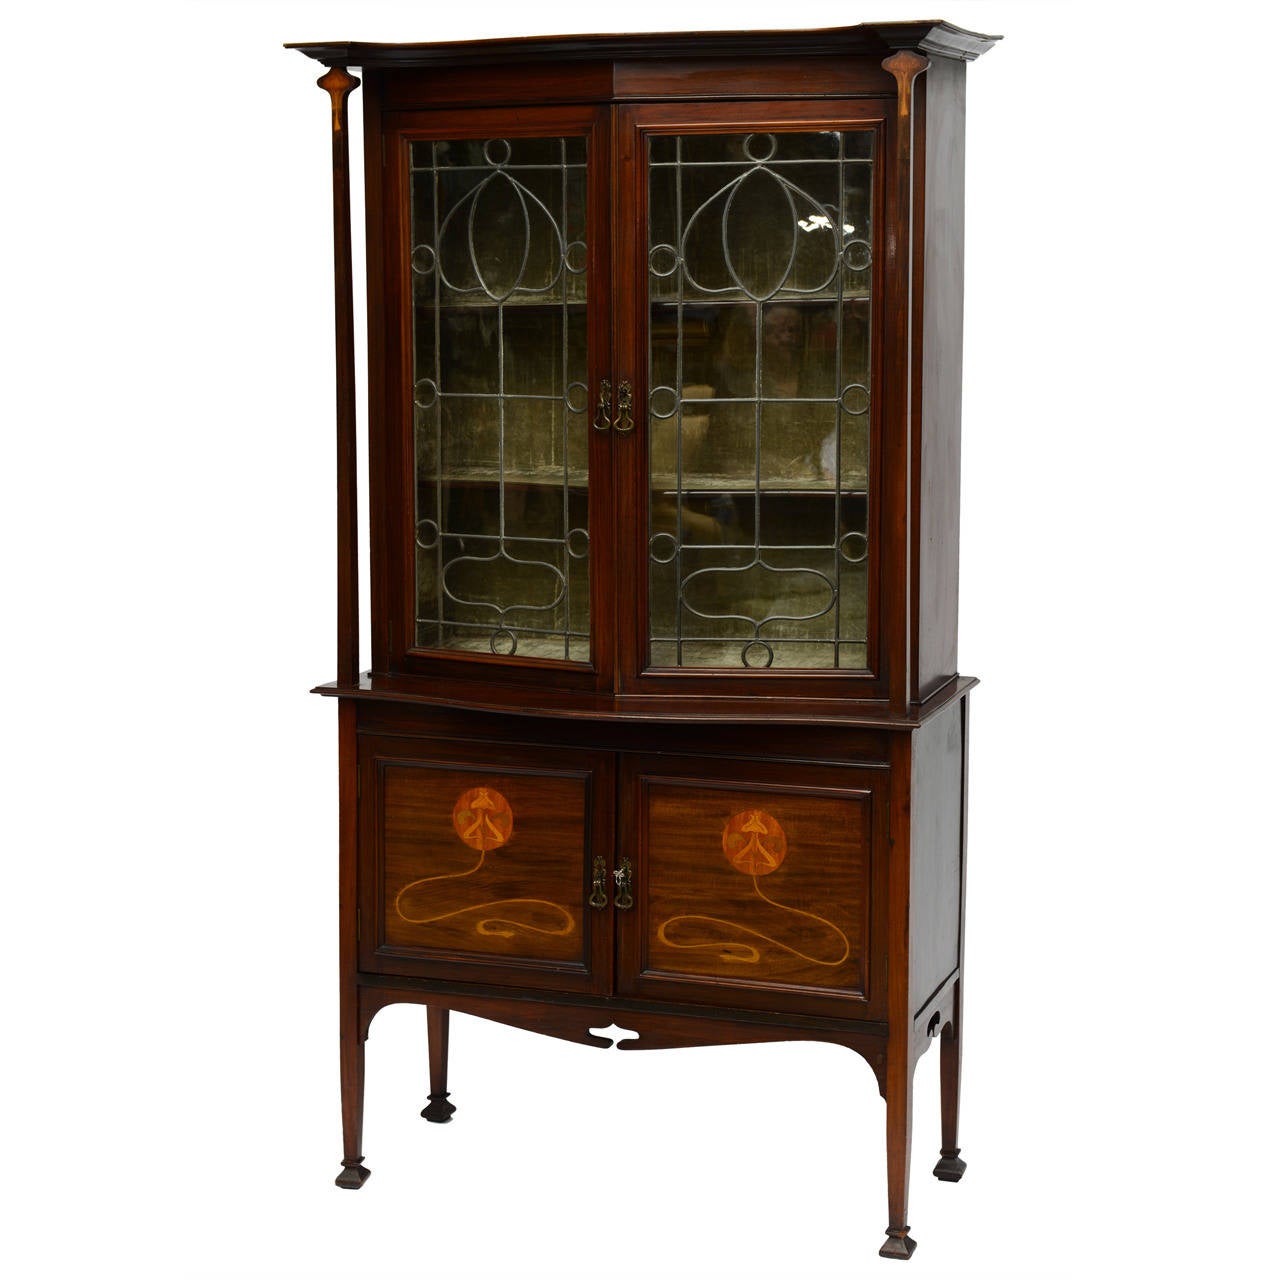 A beautiful iconic Galle/Majorelle style Art Nouveau mahogany cabinet with gracefully tapered columns terminating in stylized marquetry flora capitals under a stepped overhang pediment. The columns flank the pair of leaded clear glass doors